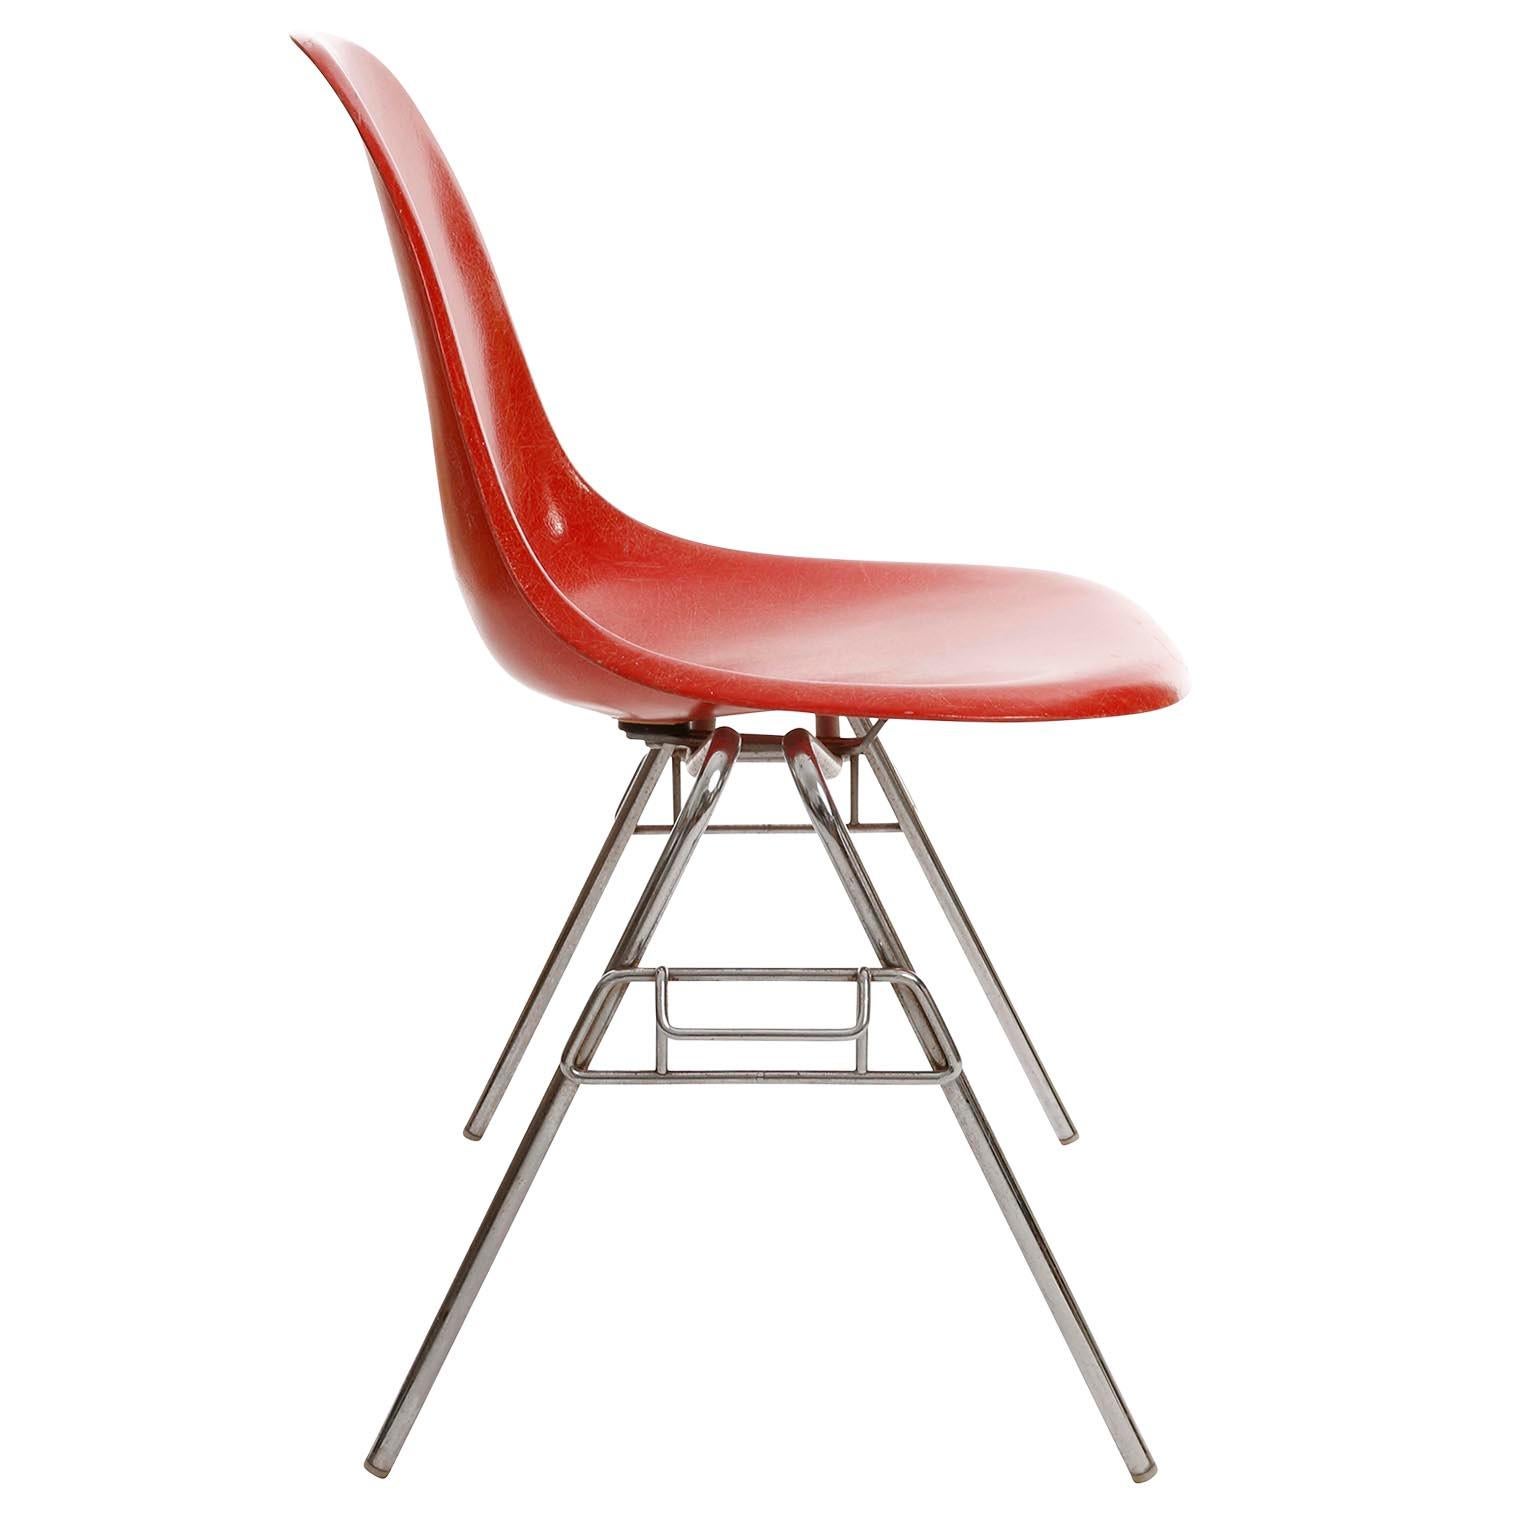 22 DSS Stacking Chairs, Charles & Ray Eames, Herman Miller, Red Fiberglass, 1974 In Good Condition For Sale In Hausmannstätten, AT